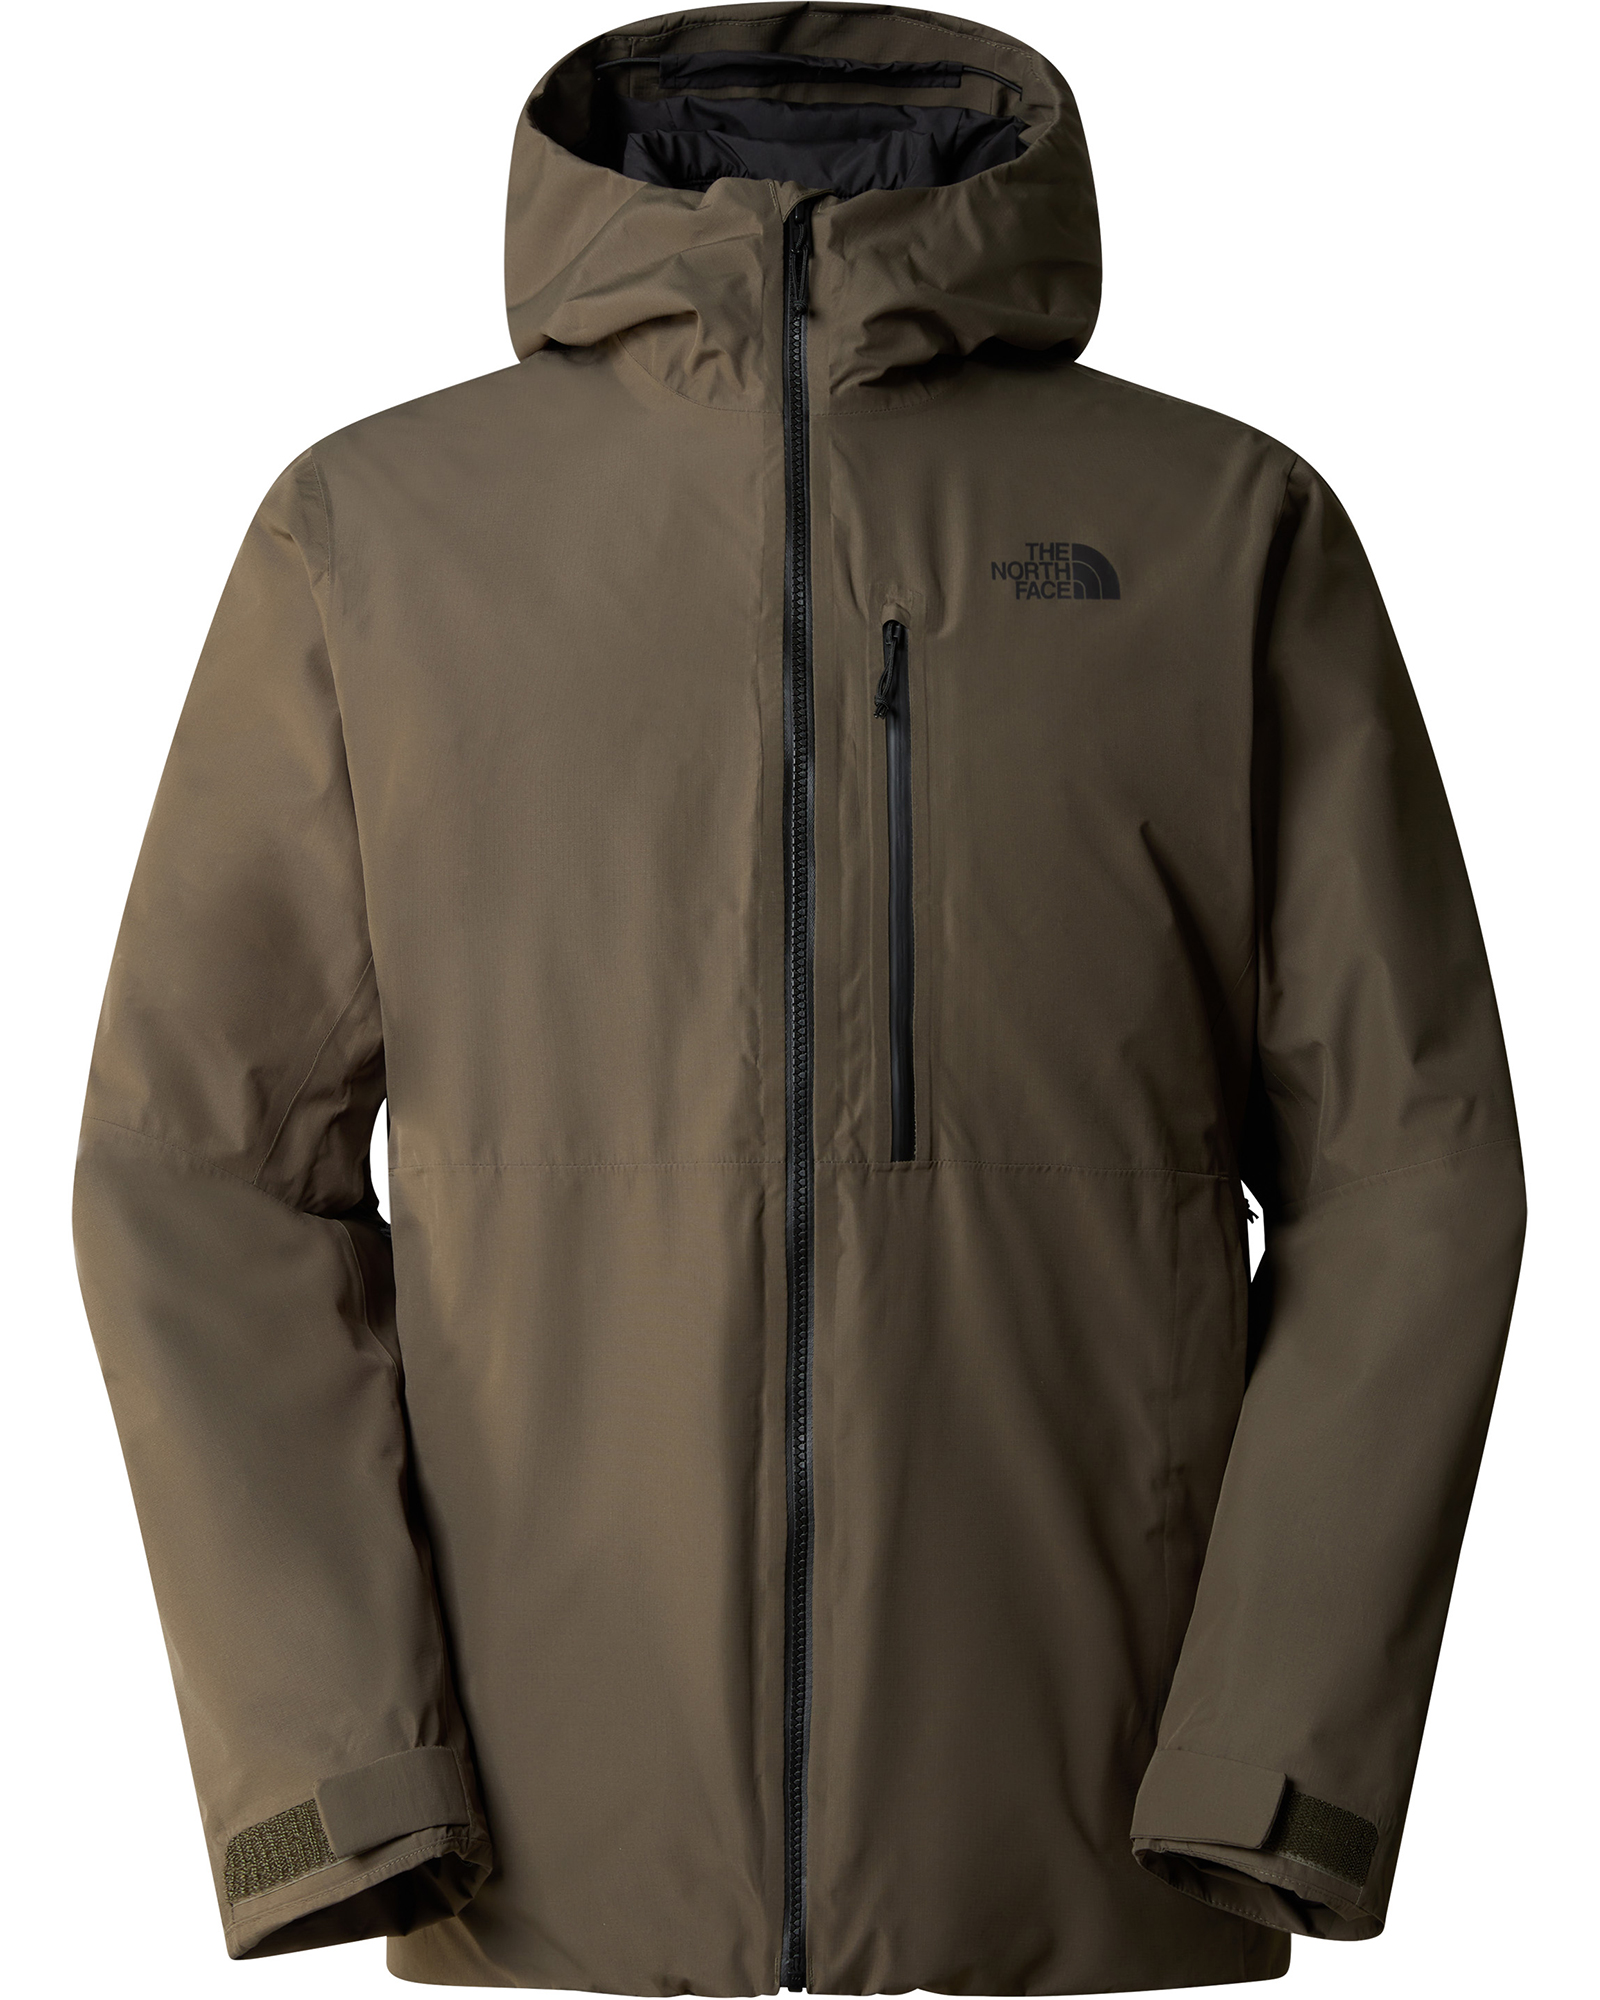 The North Face Men’s North Table Down Triclimate Jacket - New Taupe Green-TNF Black S